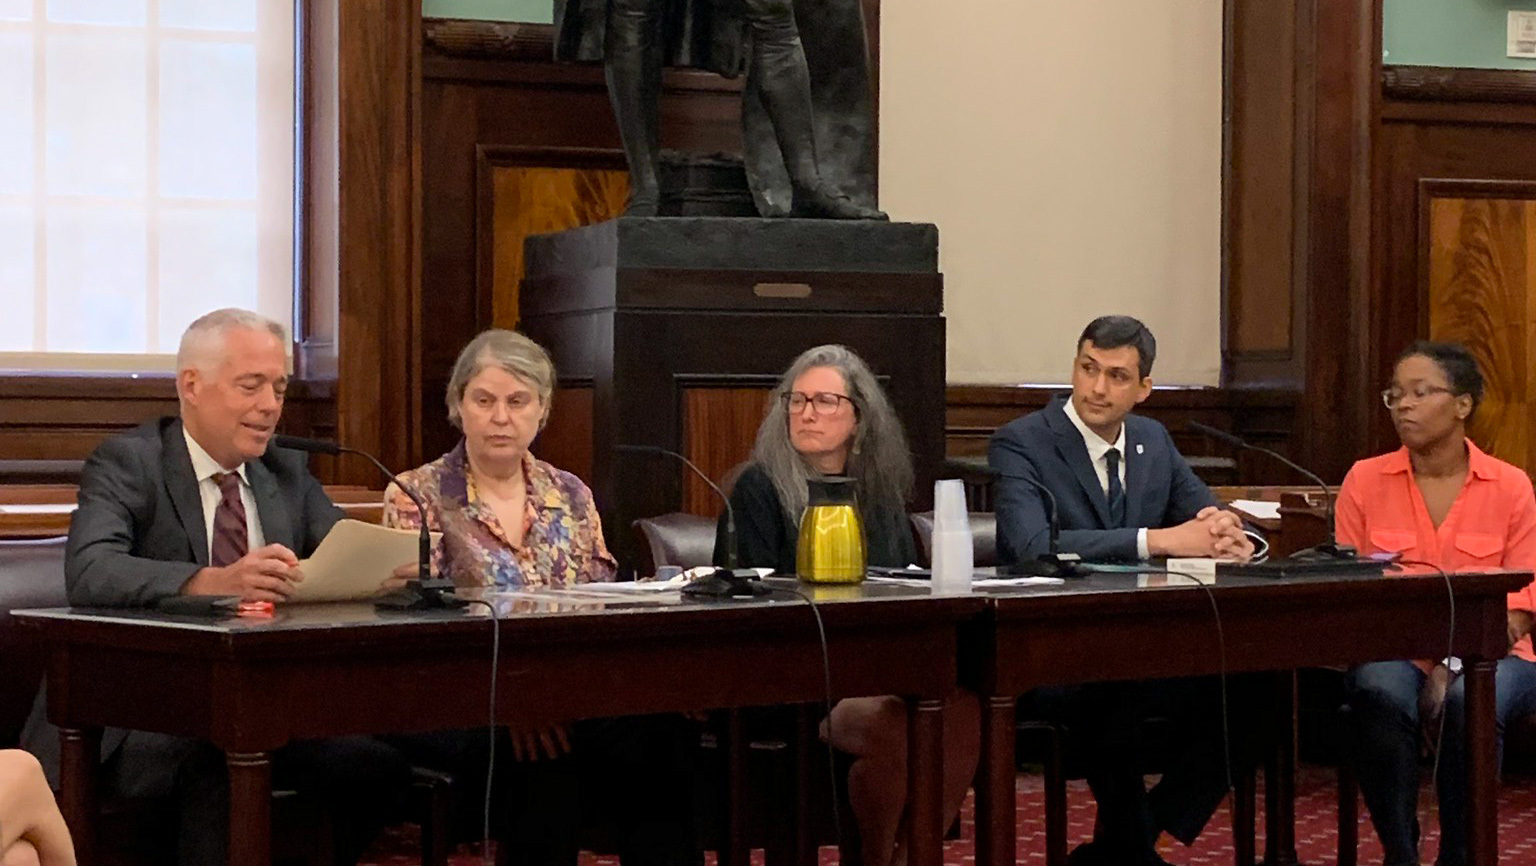 Former NYC Bird Alliance Executive Director Kathryn Heintz (seated middle) testified before the New York City Council on why the bird-friendly materials bill needed to be passed. Photo: NYC Bird Alliance